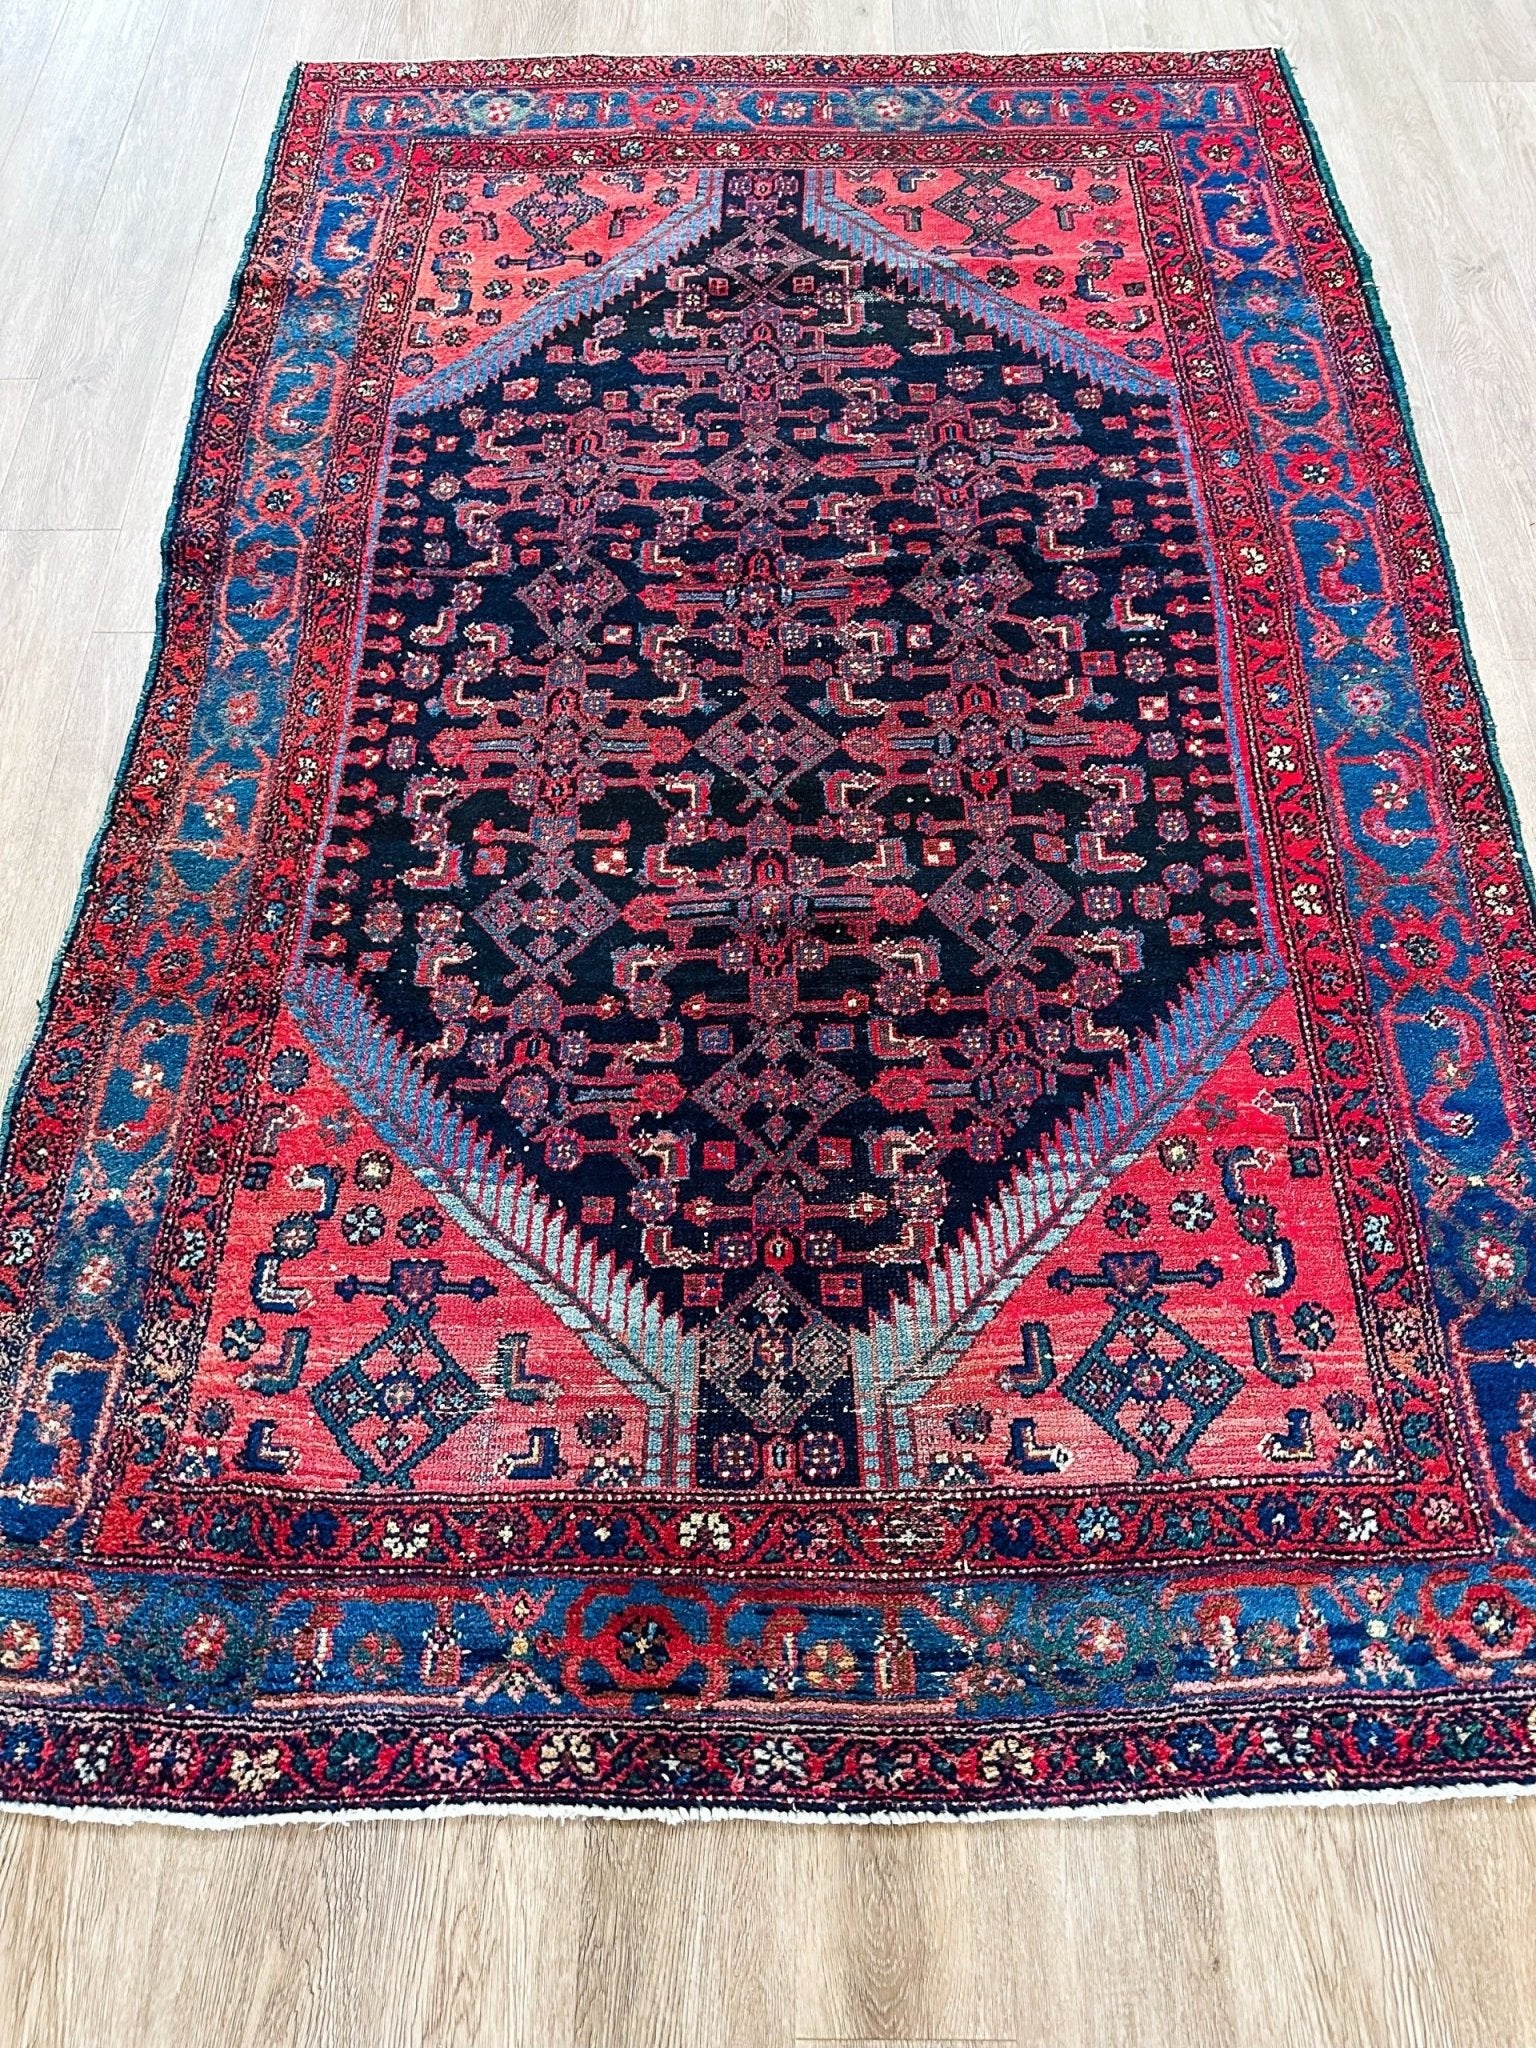 Antique Rug # 2878 | 4' 6" x 6' 11" - Krazy For Rugs